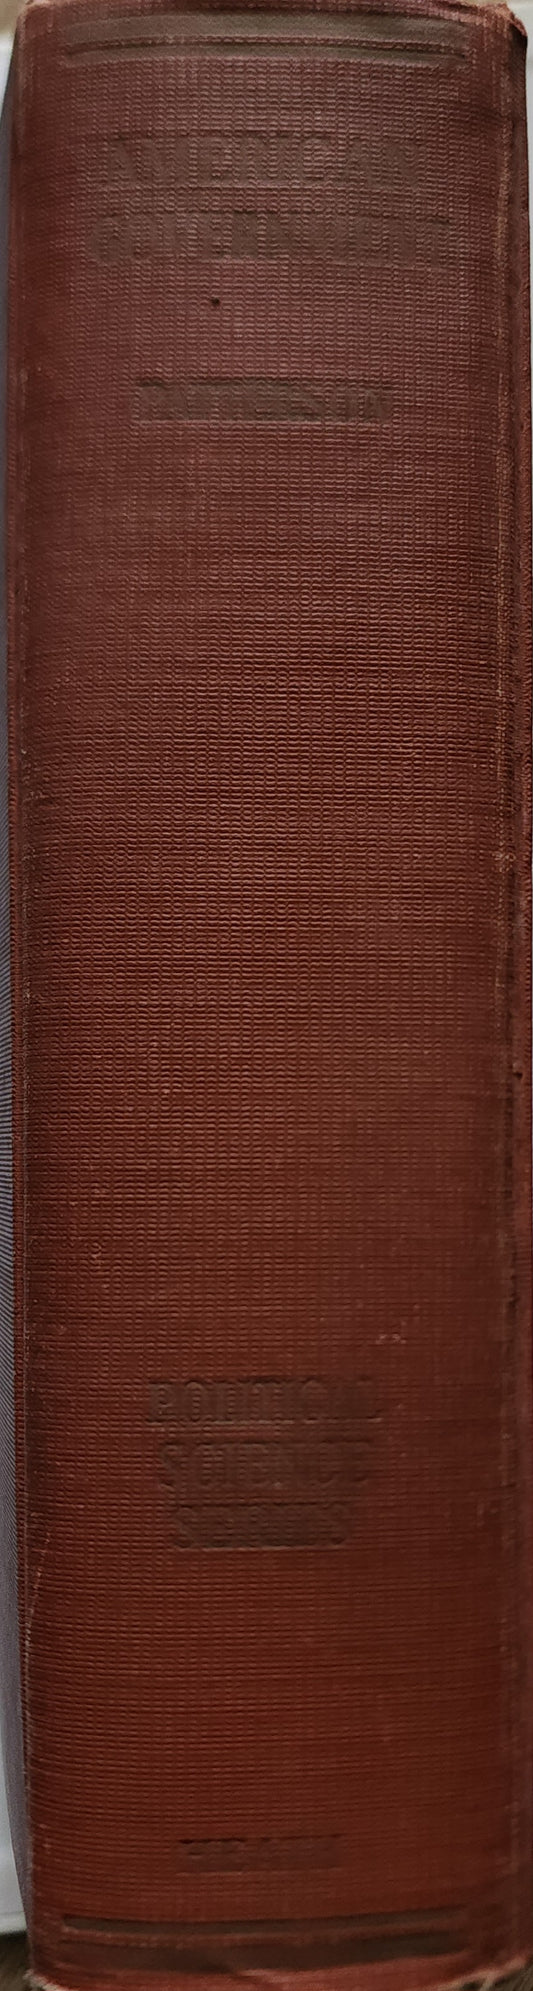 American Government Caleb Perry Patterson PhD LLB D.C. Heath and Company hardcover 1929